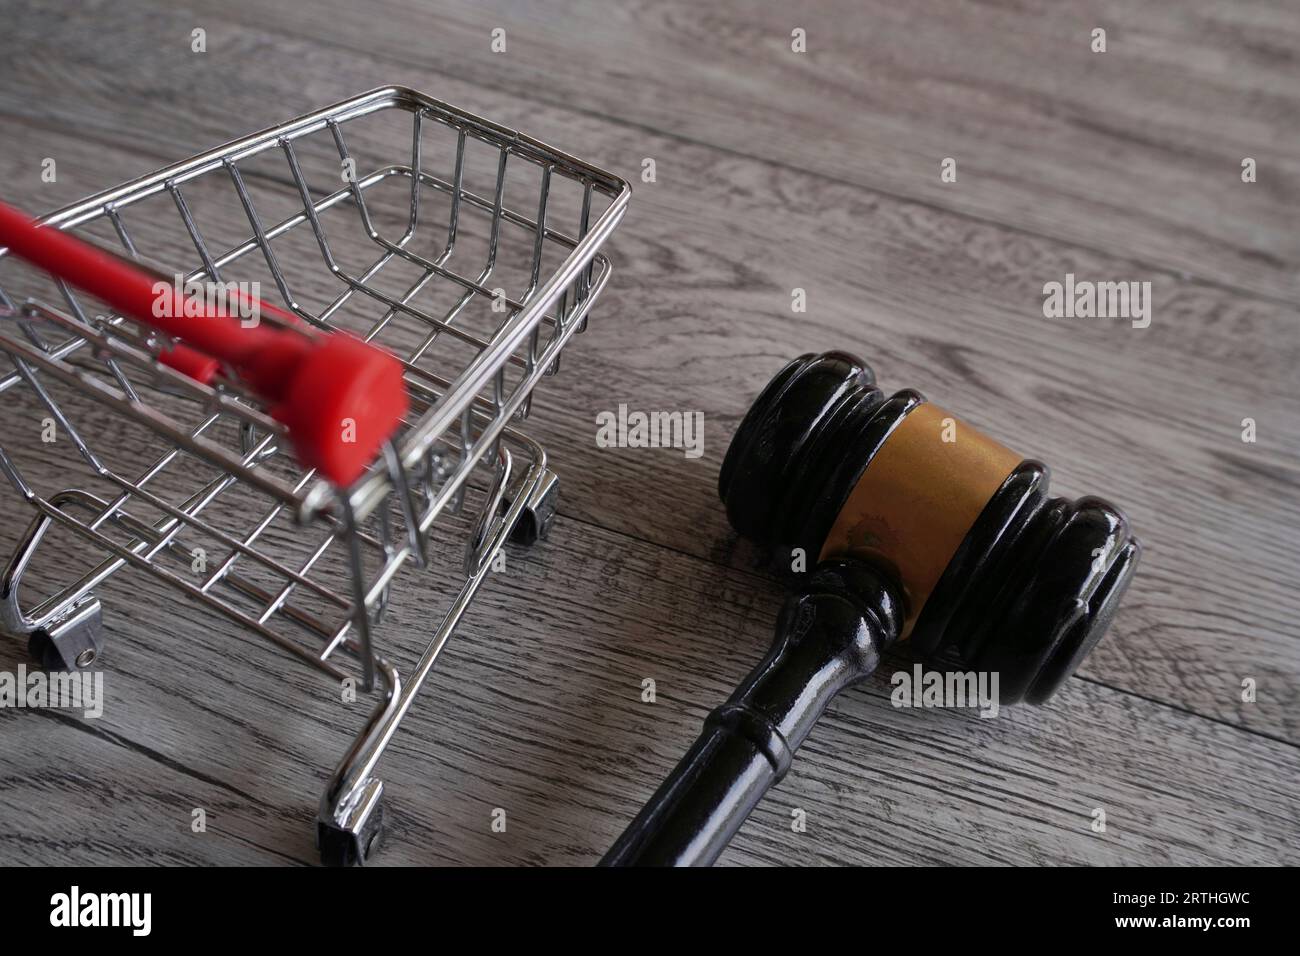 Closeup image of judge gavel and shopping trolley on table. Consumer rights, customer protection, commercial law concept Stock Photo